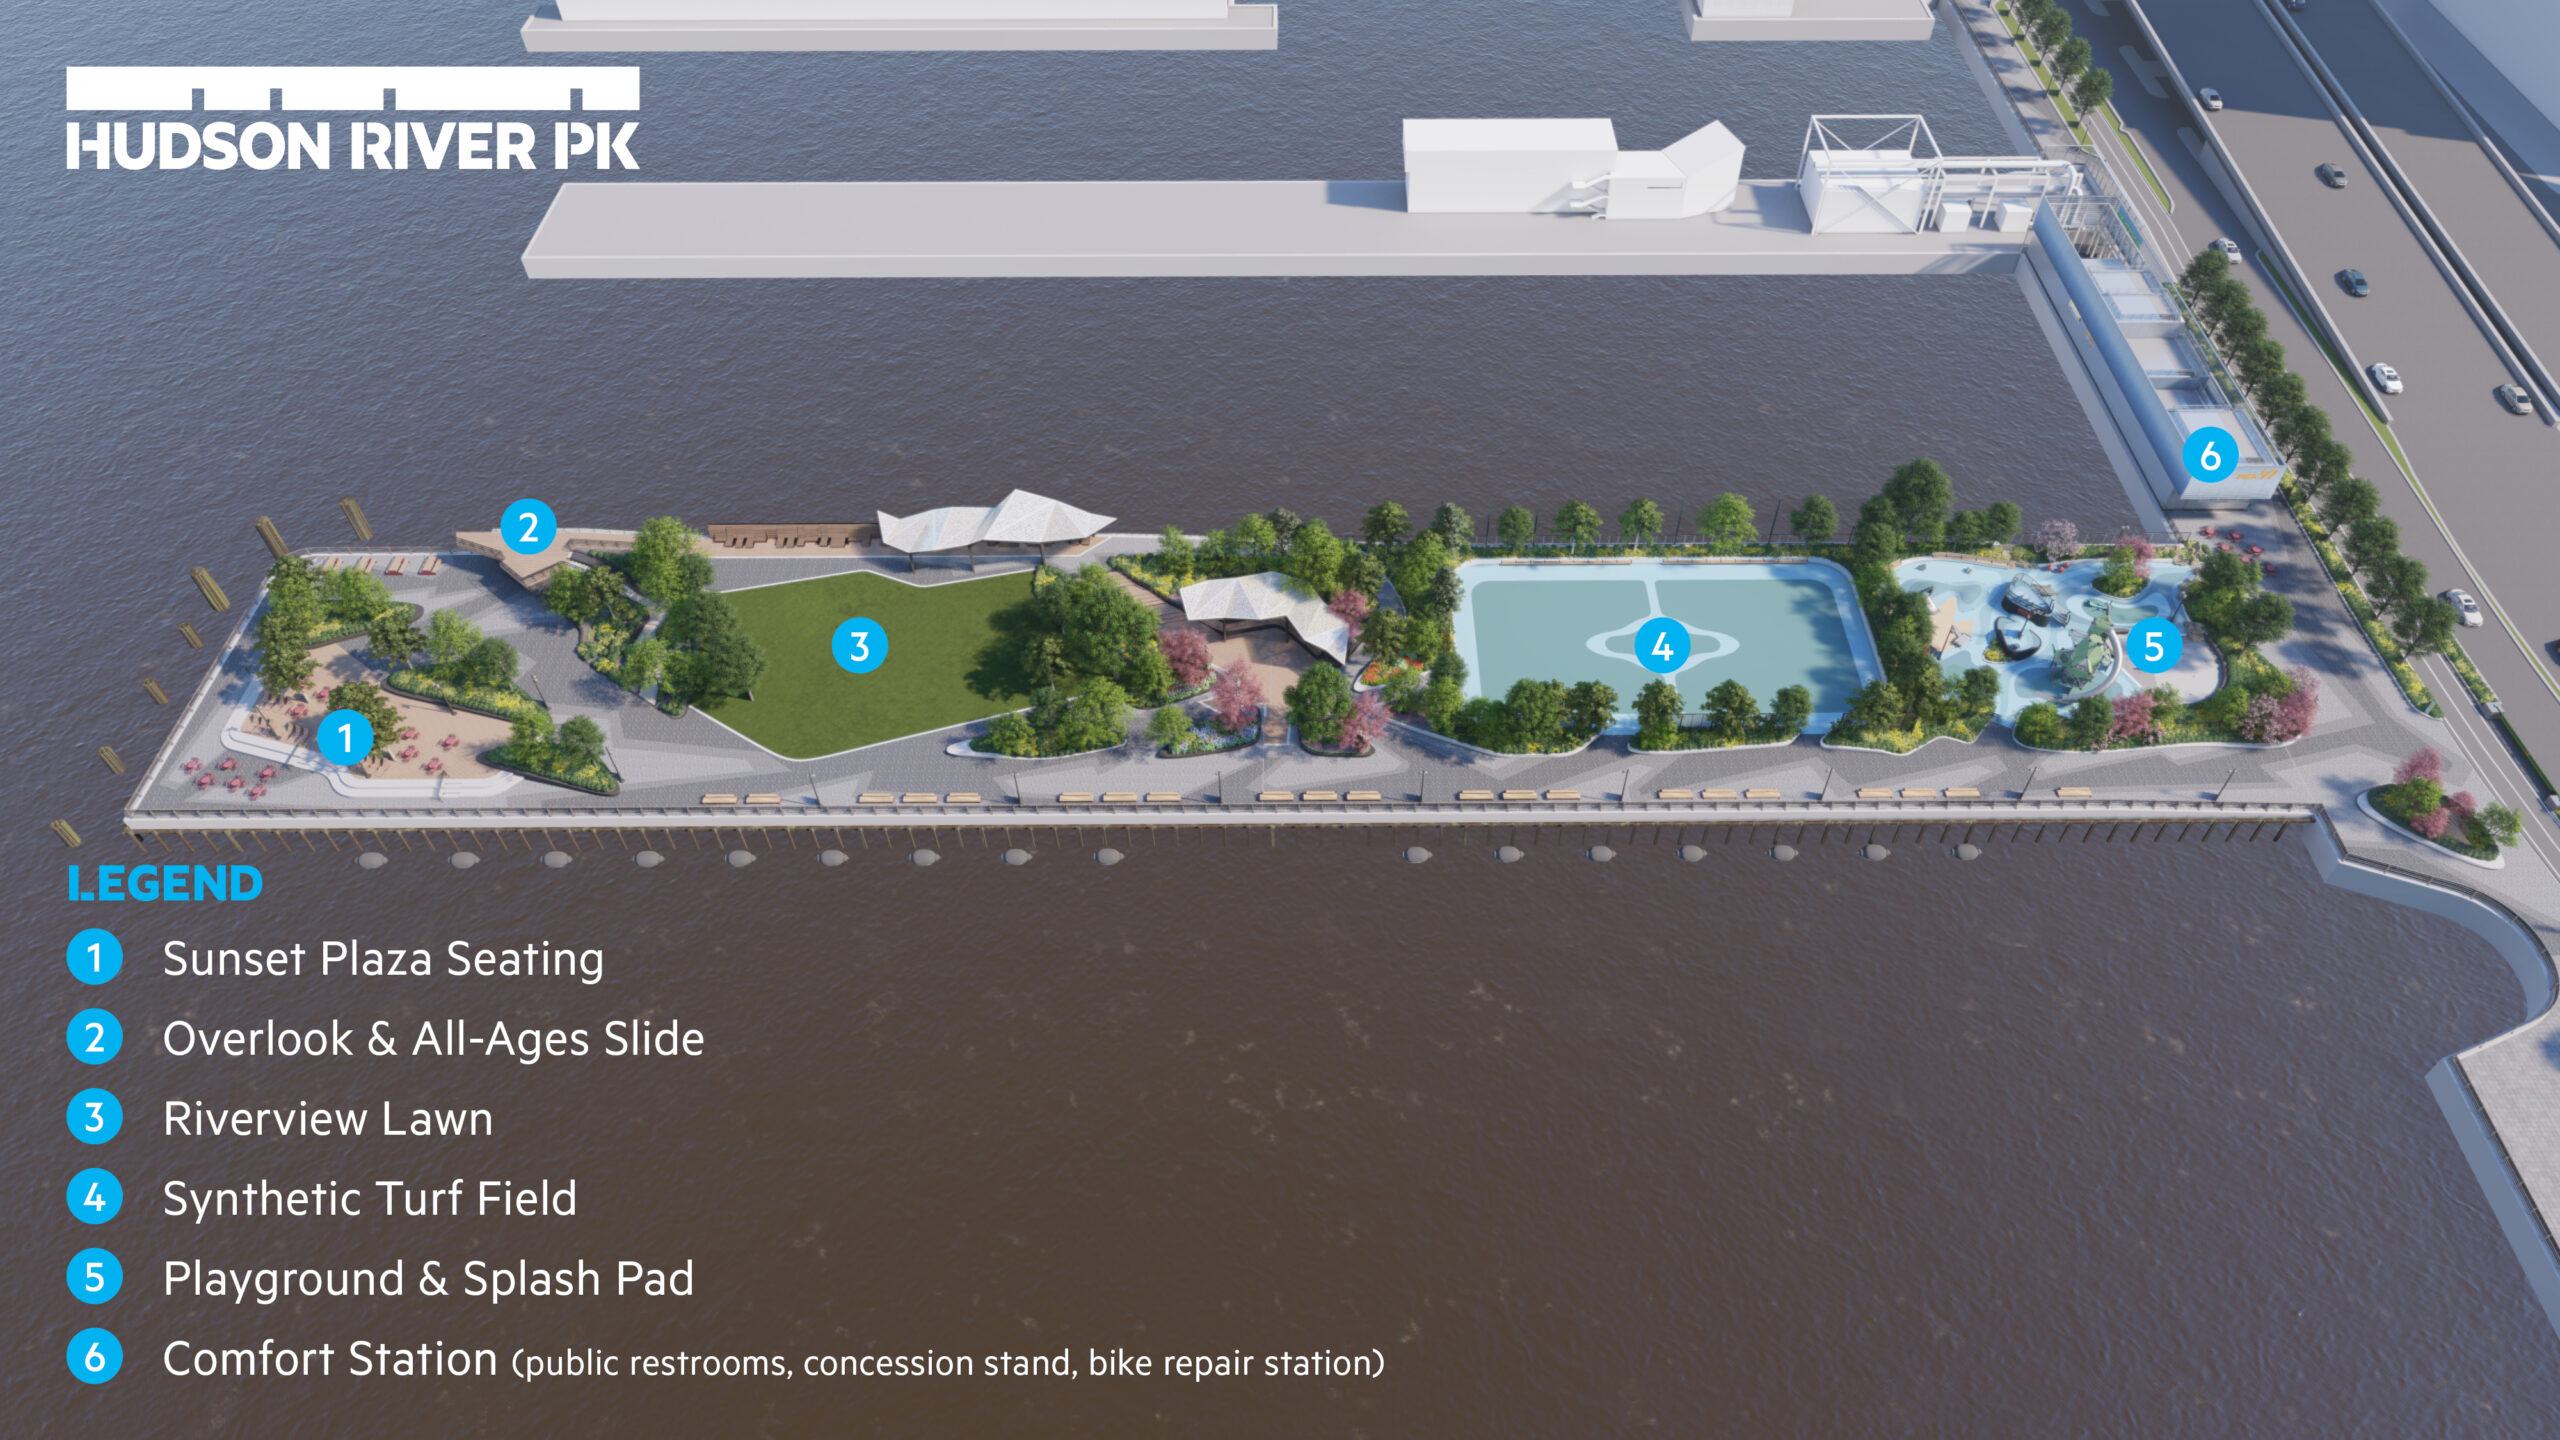 Planned construction design for Pier 97 at Hudson River Park, featuring Sunset Plaza seating, an all-ages slide, a lawn, a turf field, a playground with a splash pad and a comfort station.